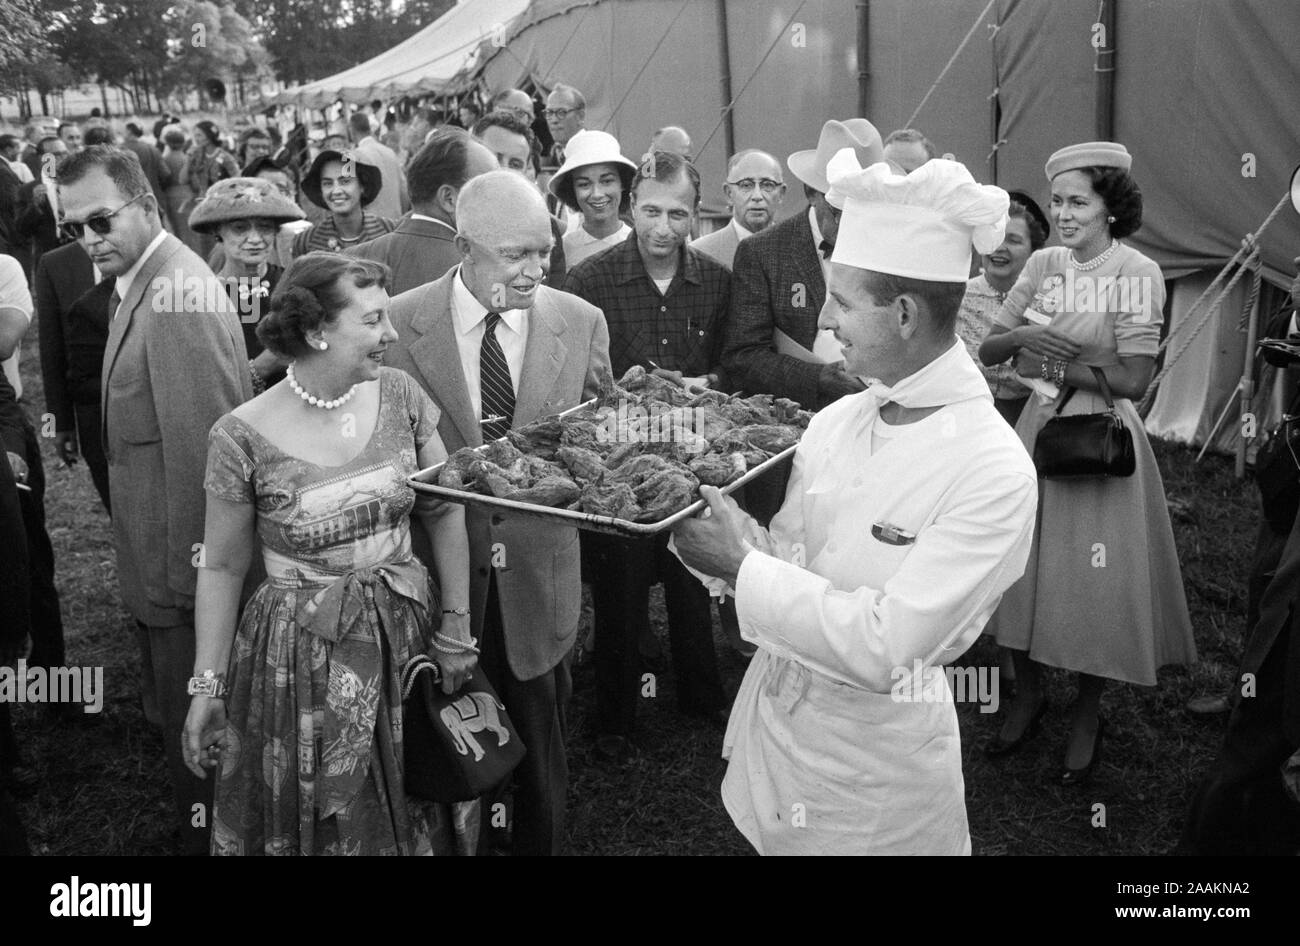 U.S. President Dwight Eisenhower and First Lady Mamie Eisenhower at Presidential Campaign Kick-Off Picnic at their Farm, Gettysburg, Pennsylvania, USA, photograph by Thomas J. O'Halloran, September 12, 1956 Stock Photo